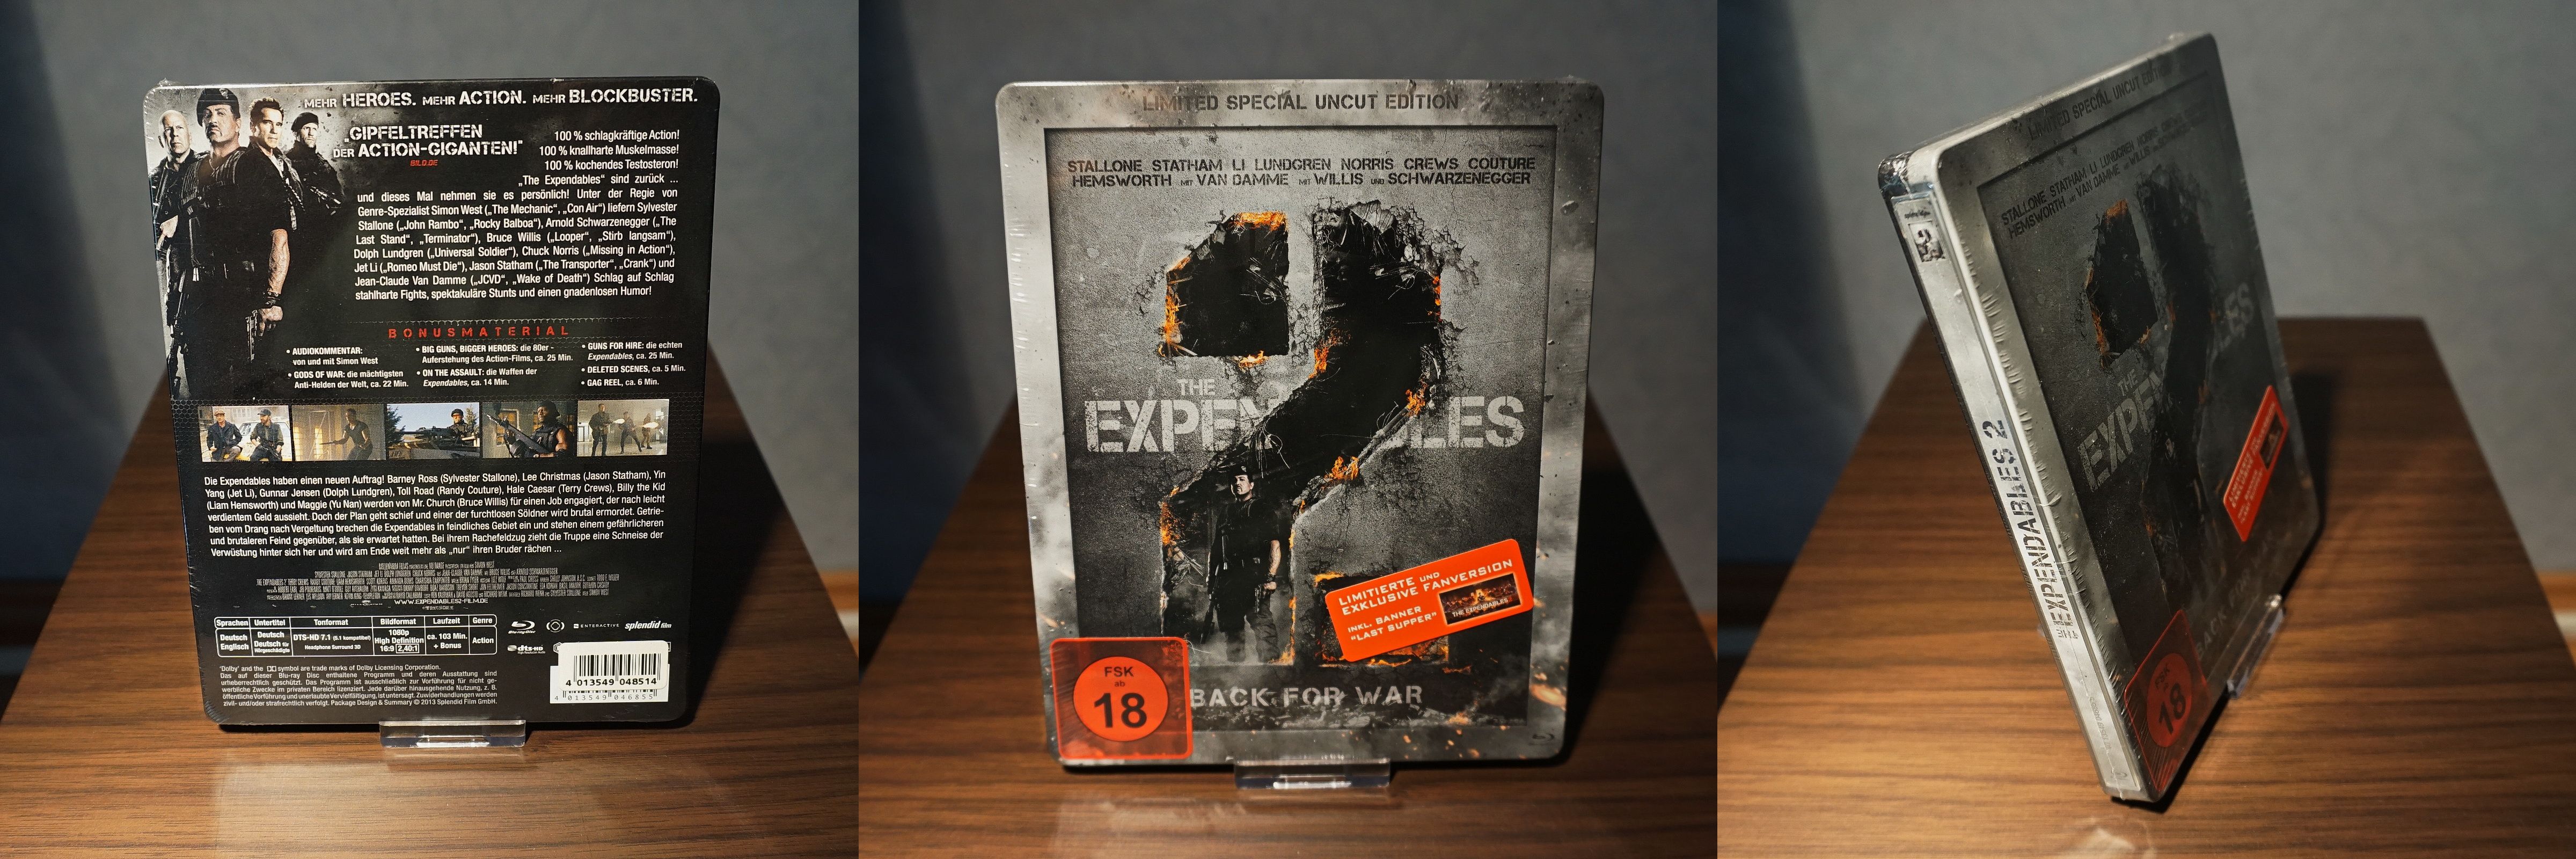 The Expendables 2 Media Markt Exclusive